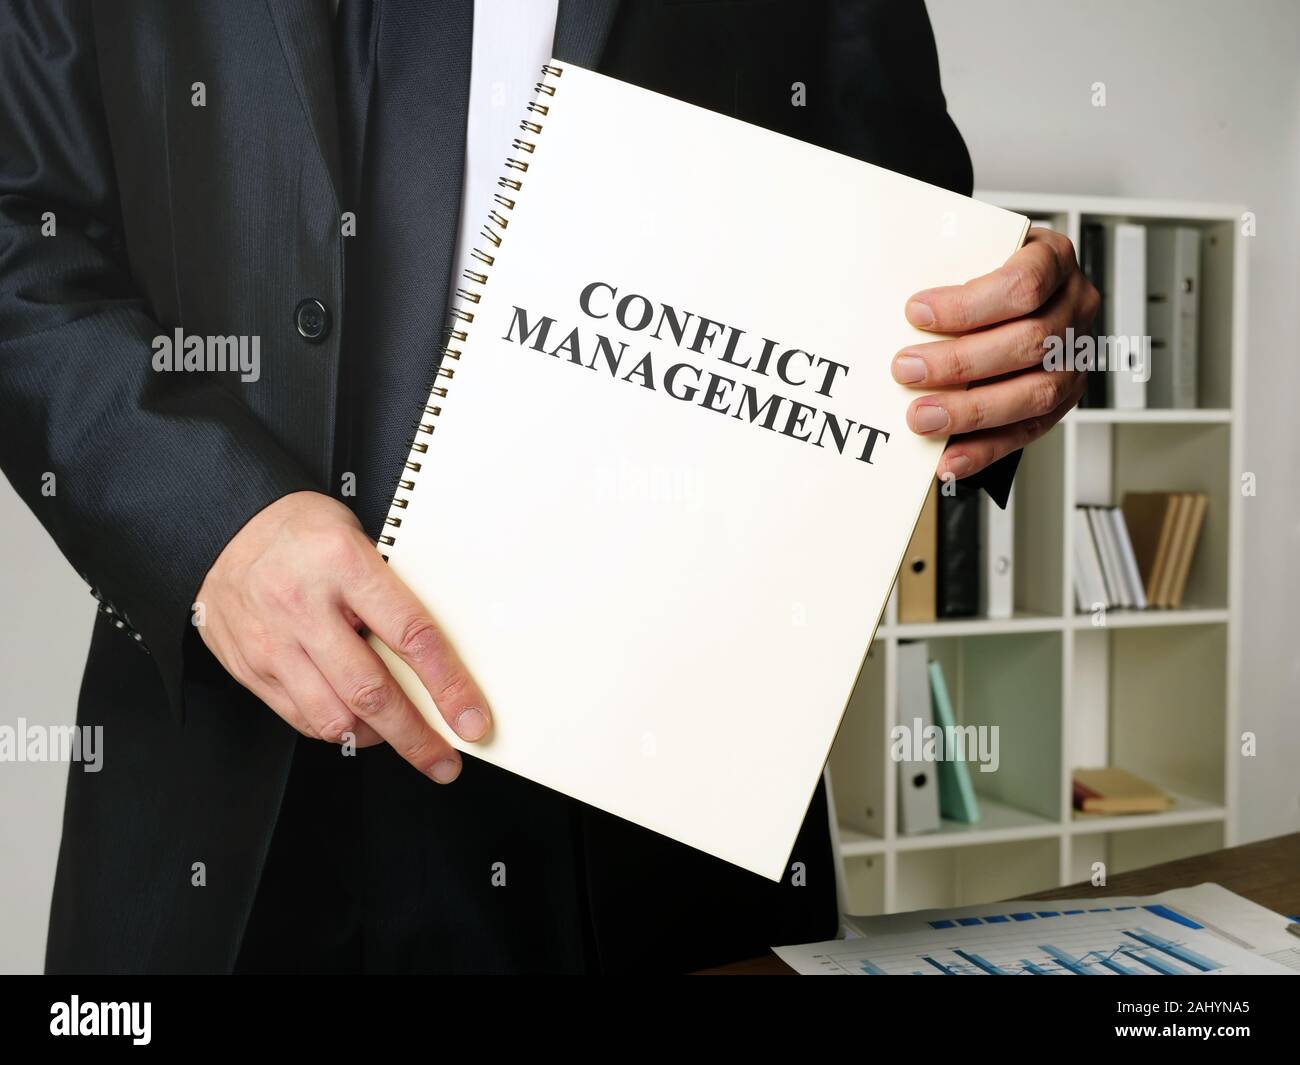 Conflict Management book in the hands of the manager. Stock Photo